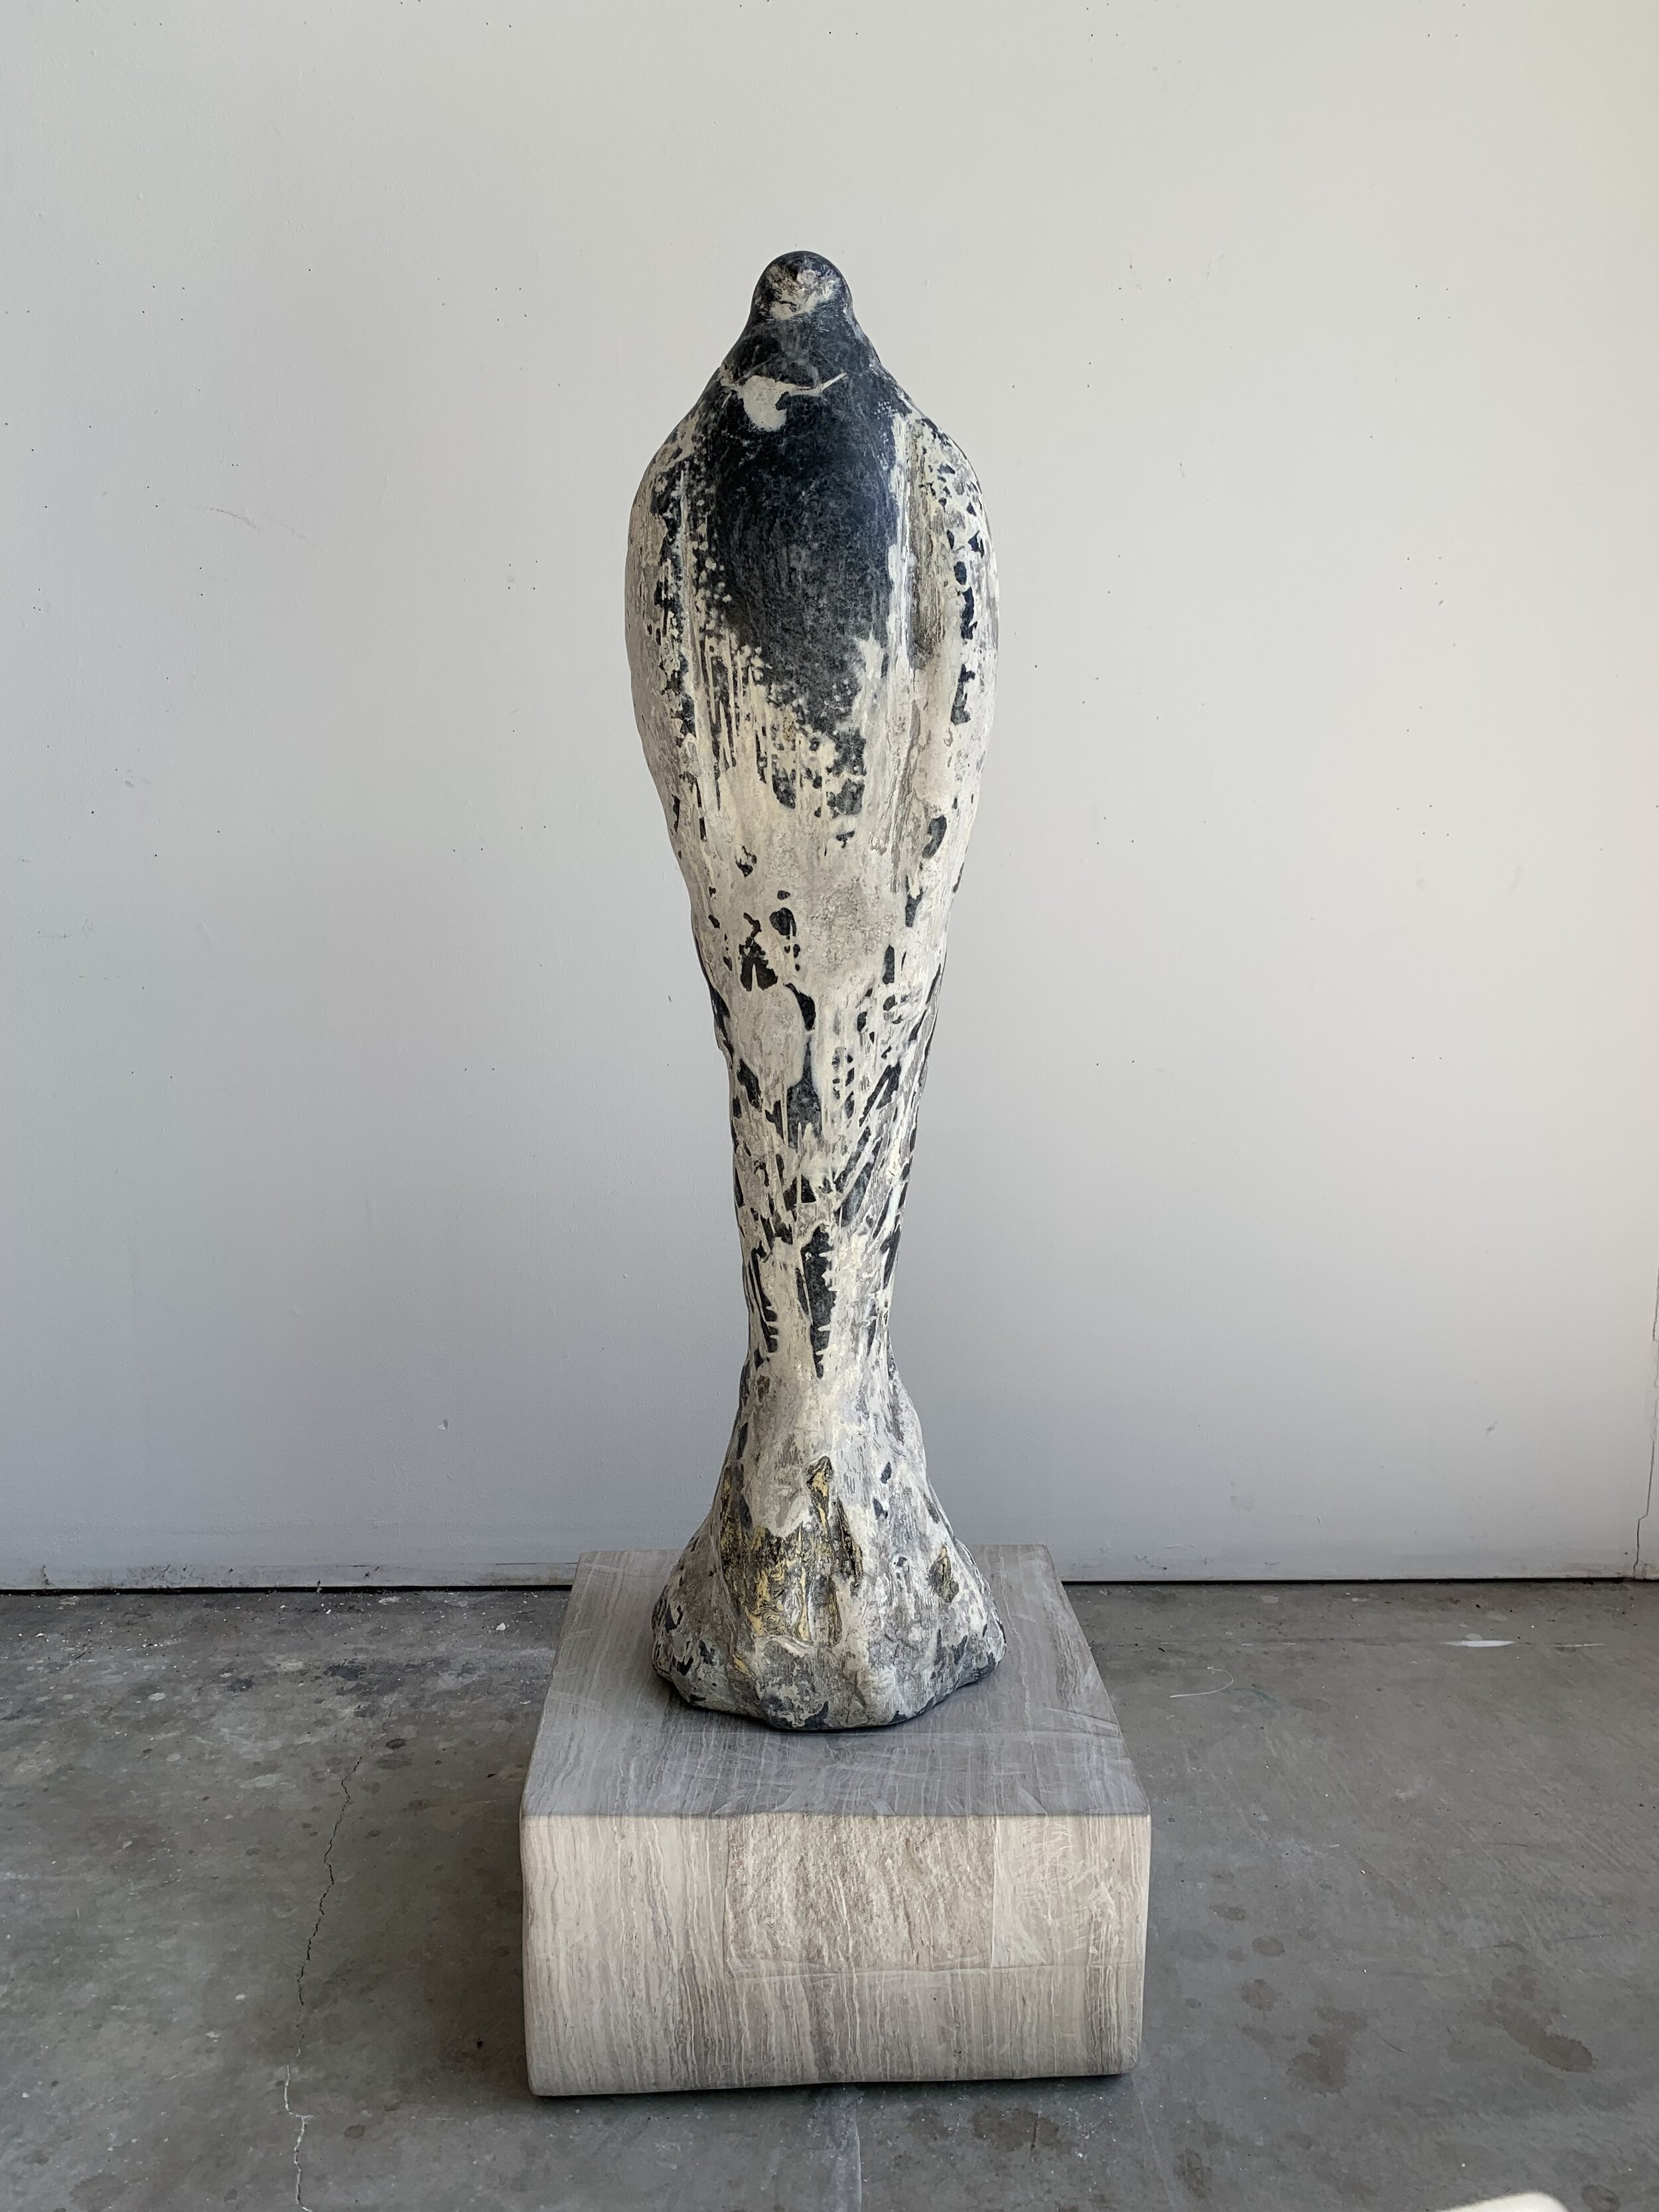  “Horus on Marble”,  1989-2021  Mixed material and marble 44 x 15 x 15 inches 